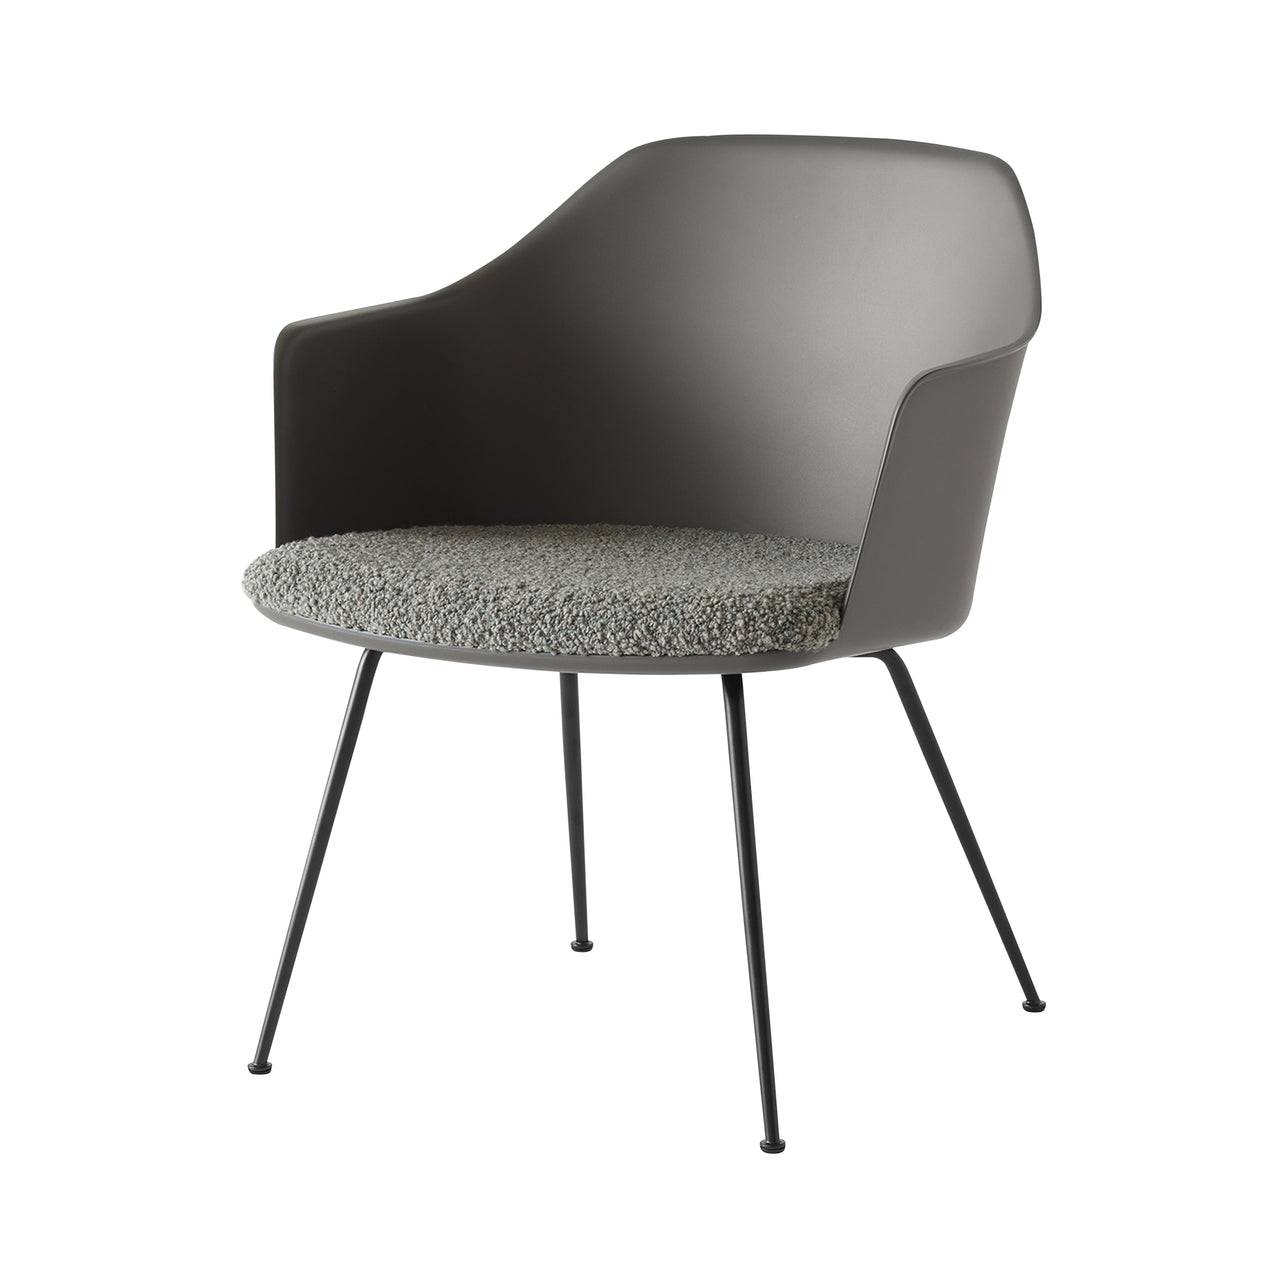 Rely Lounge Chair HW102: Stone Grey